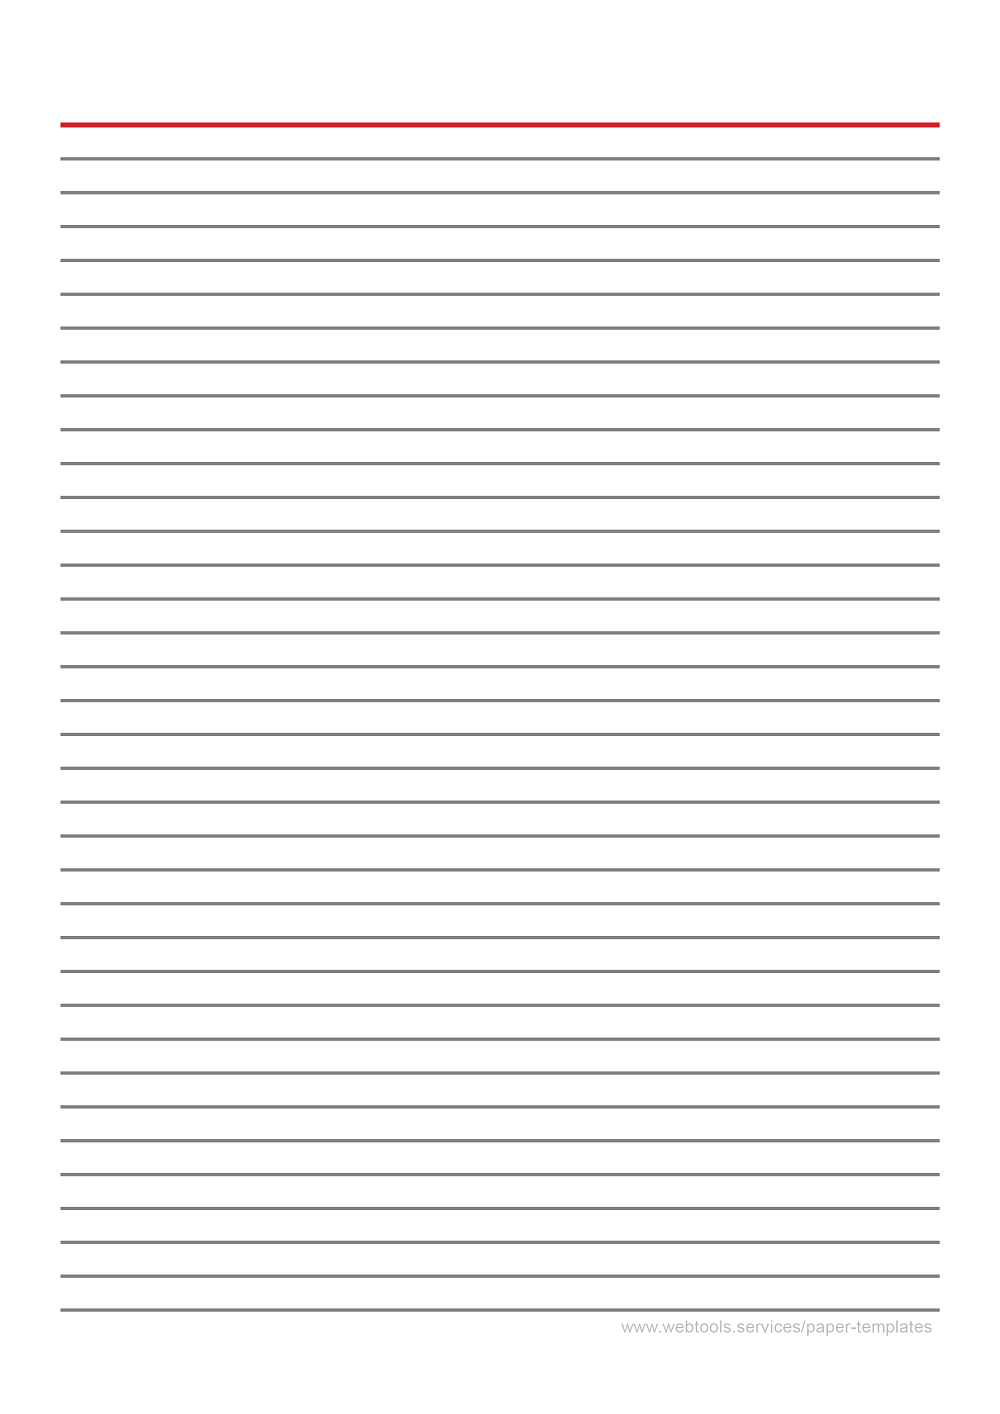 Black Line Writing Paper Template With Horizontal Red Margin And 7_1mm Line Height